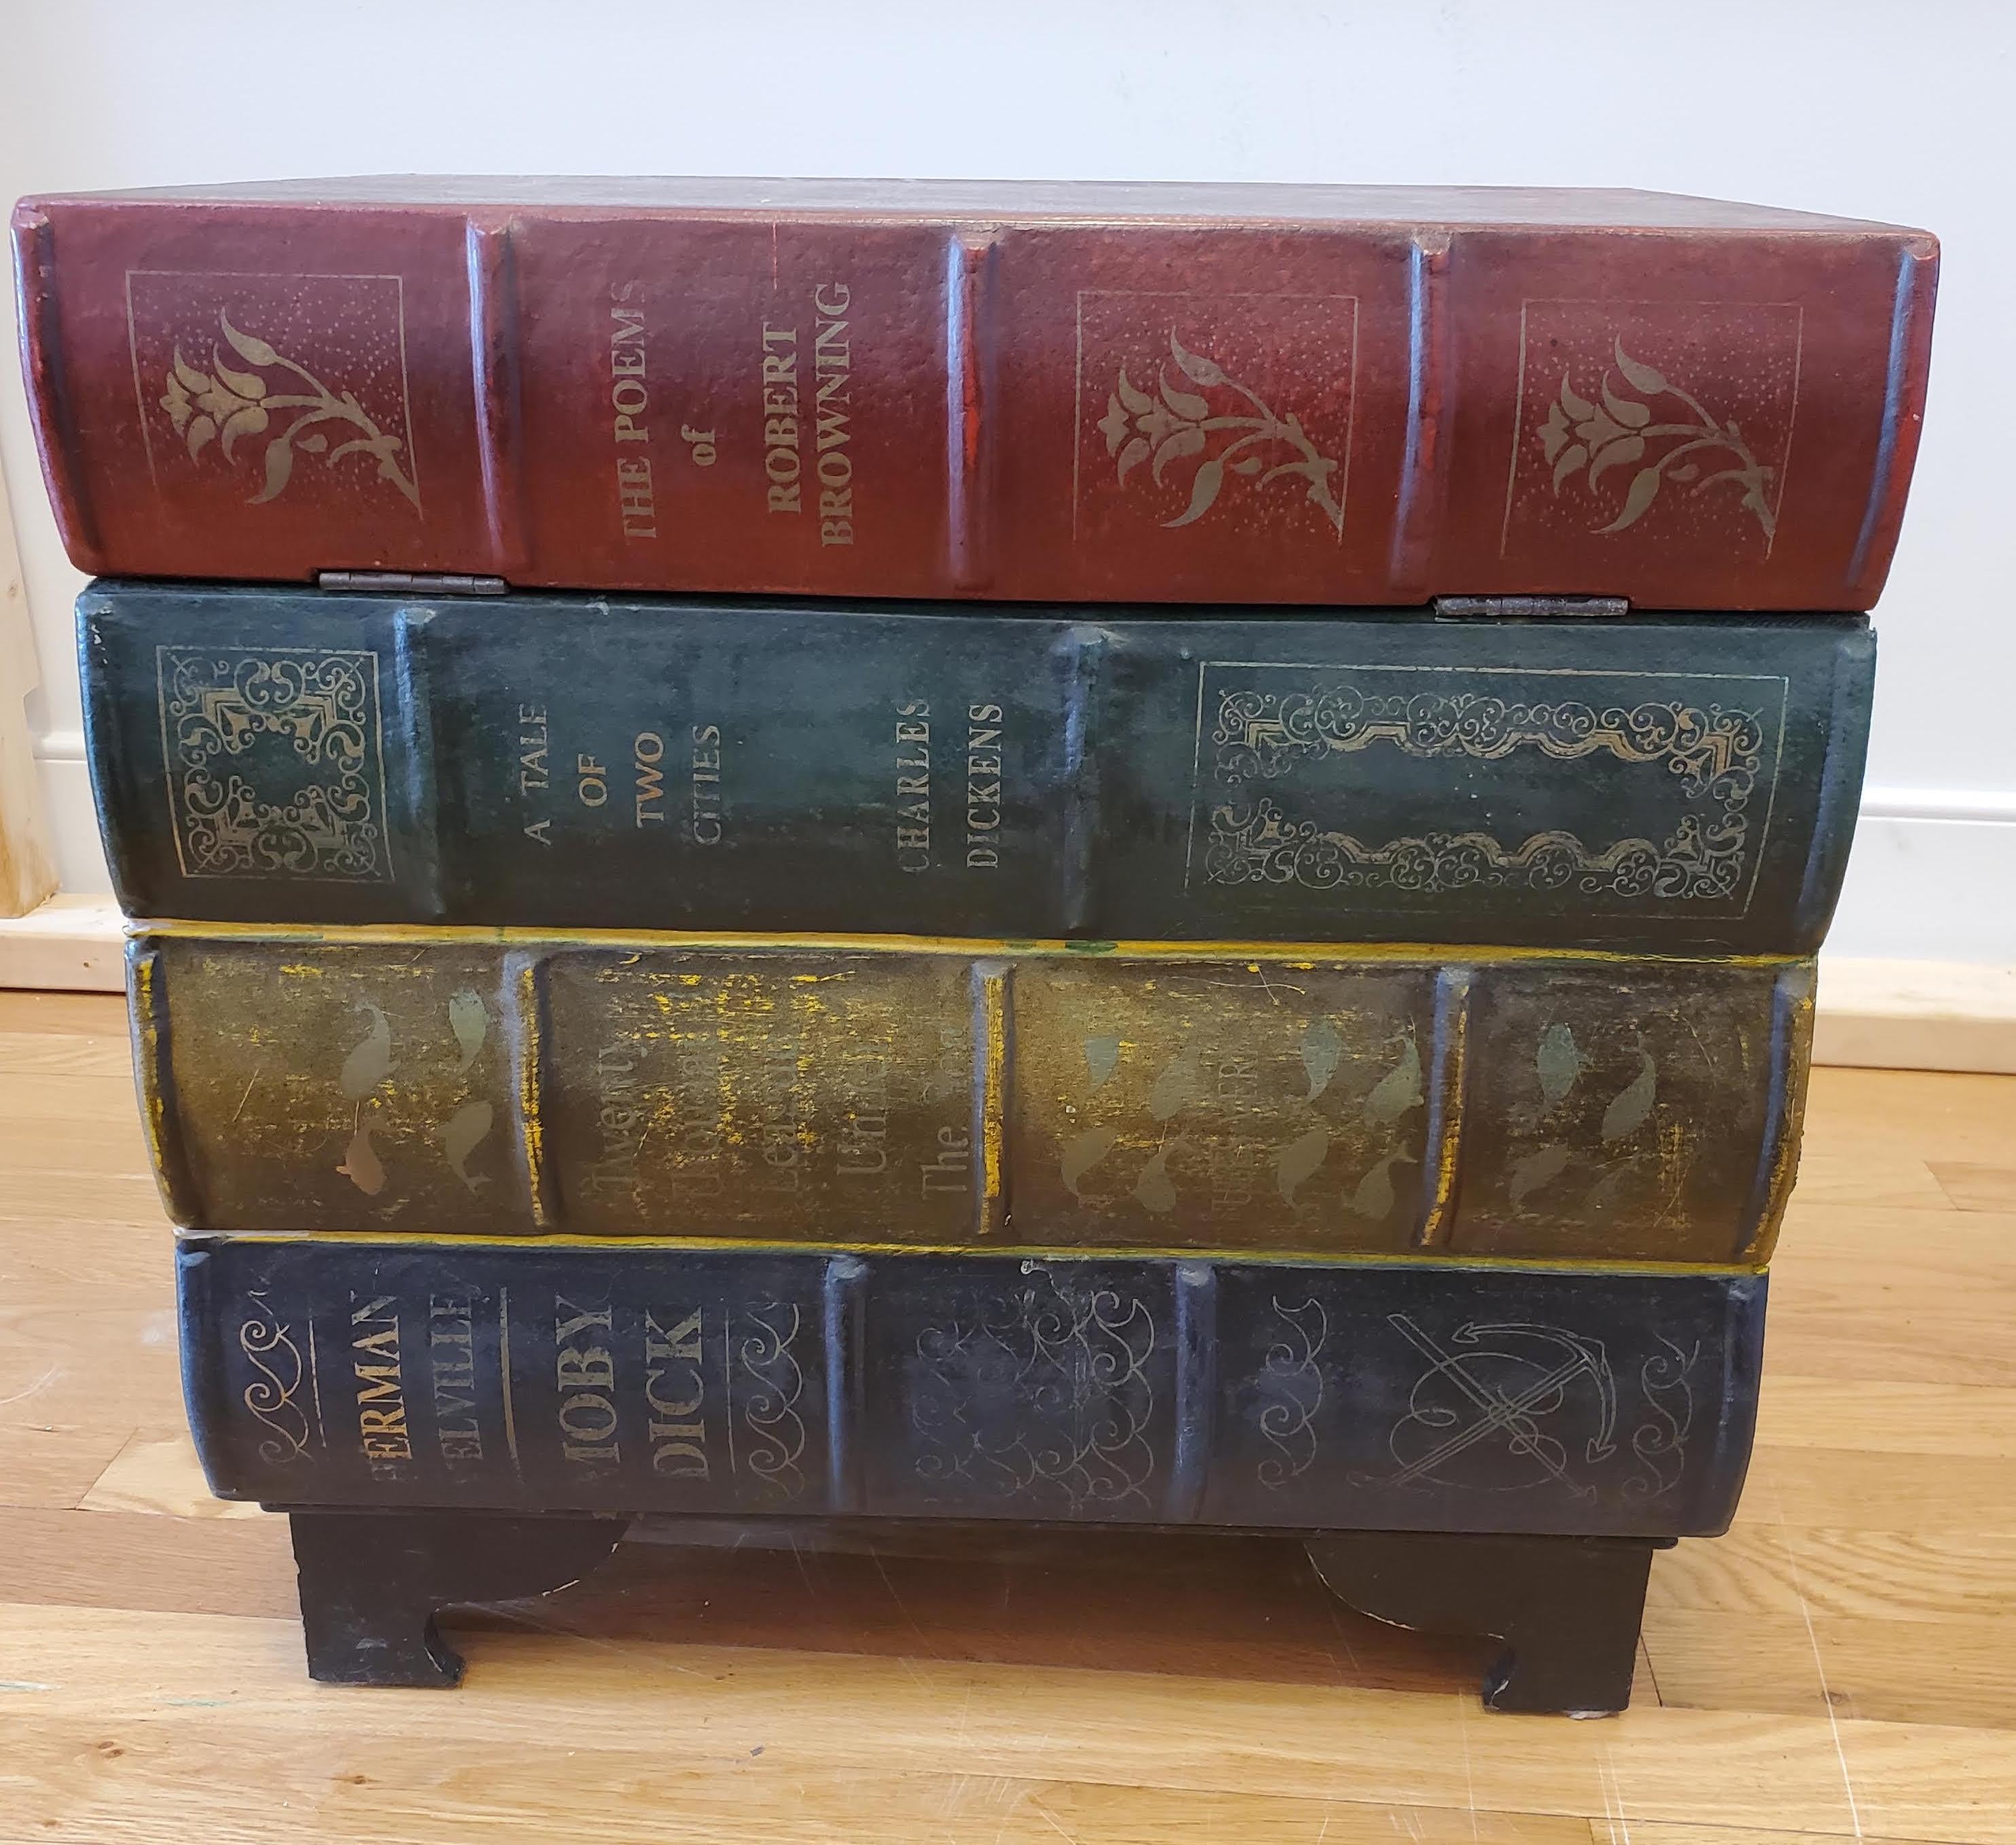 Late 19th century English leather faux “Book” table. A simulated stack of leather books with English classical titles “Moby Dick”, “Tale of Two Cities”, 